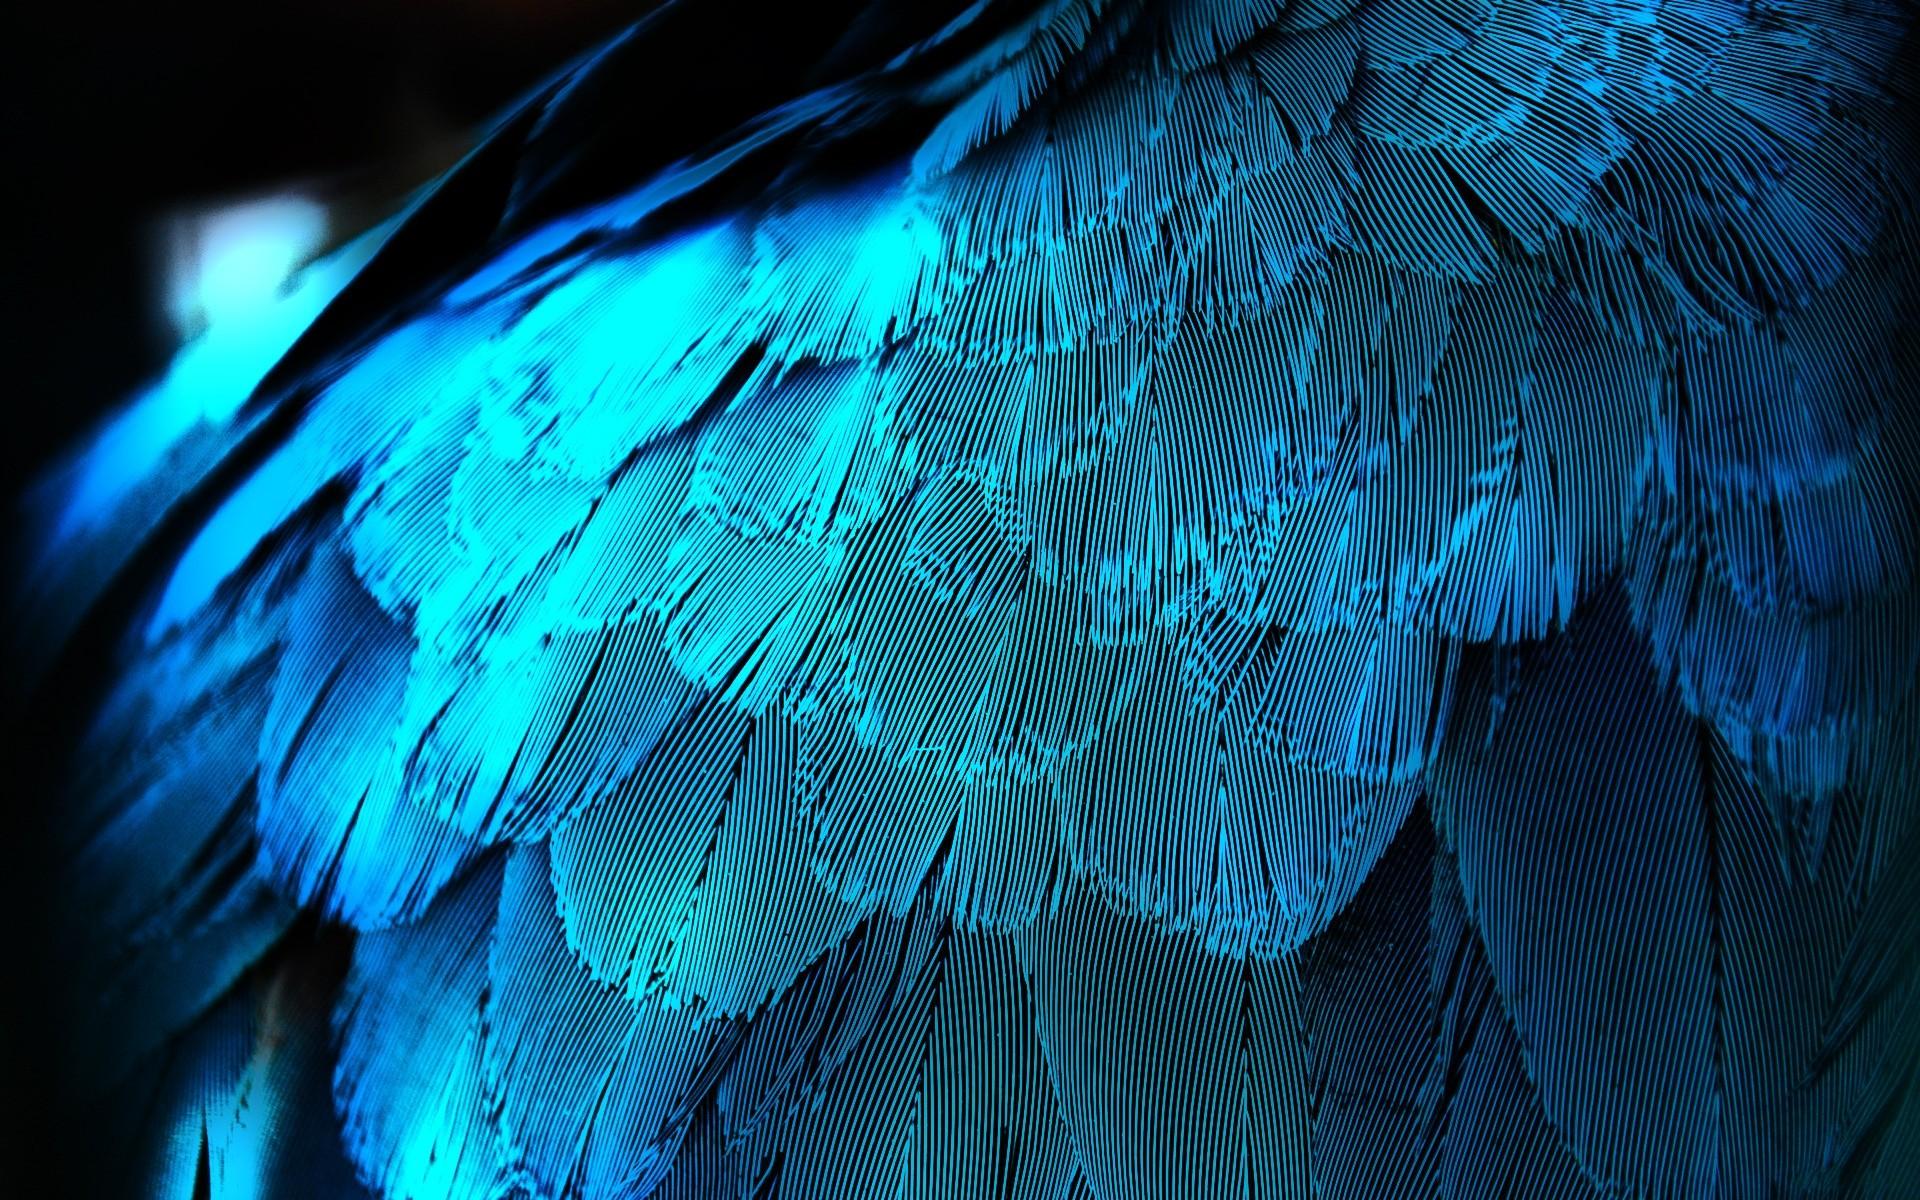 Electric Blue Feathers wallpaper. Electric Blue Feathers